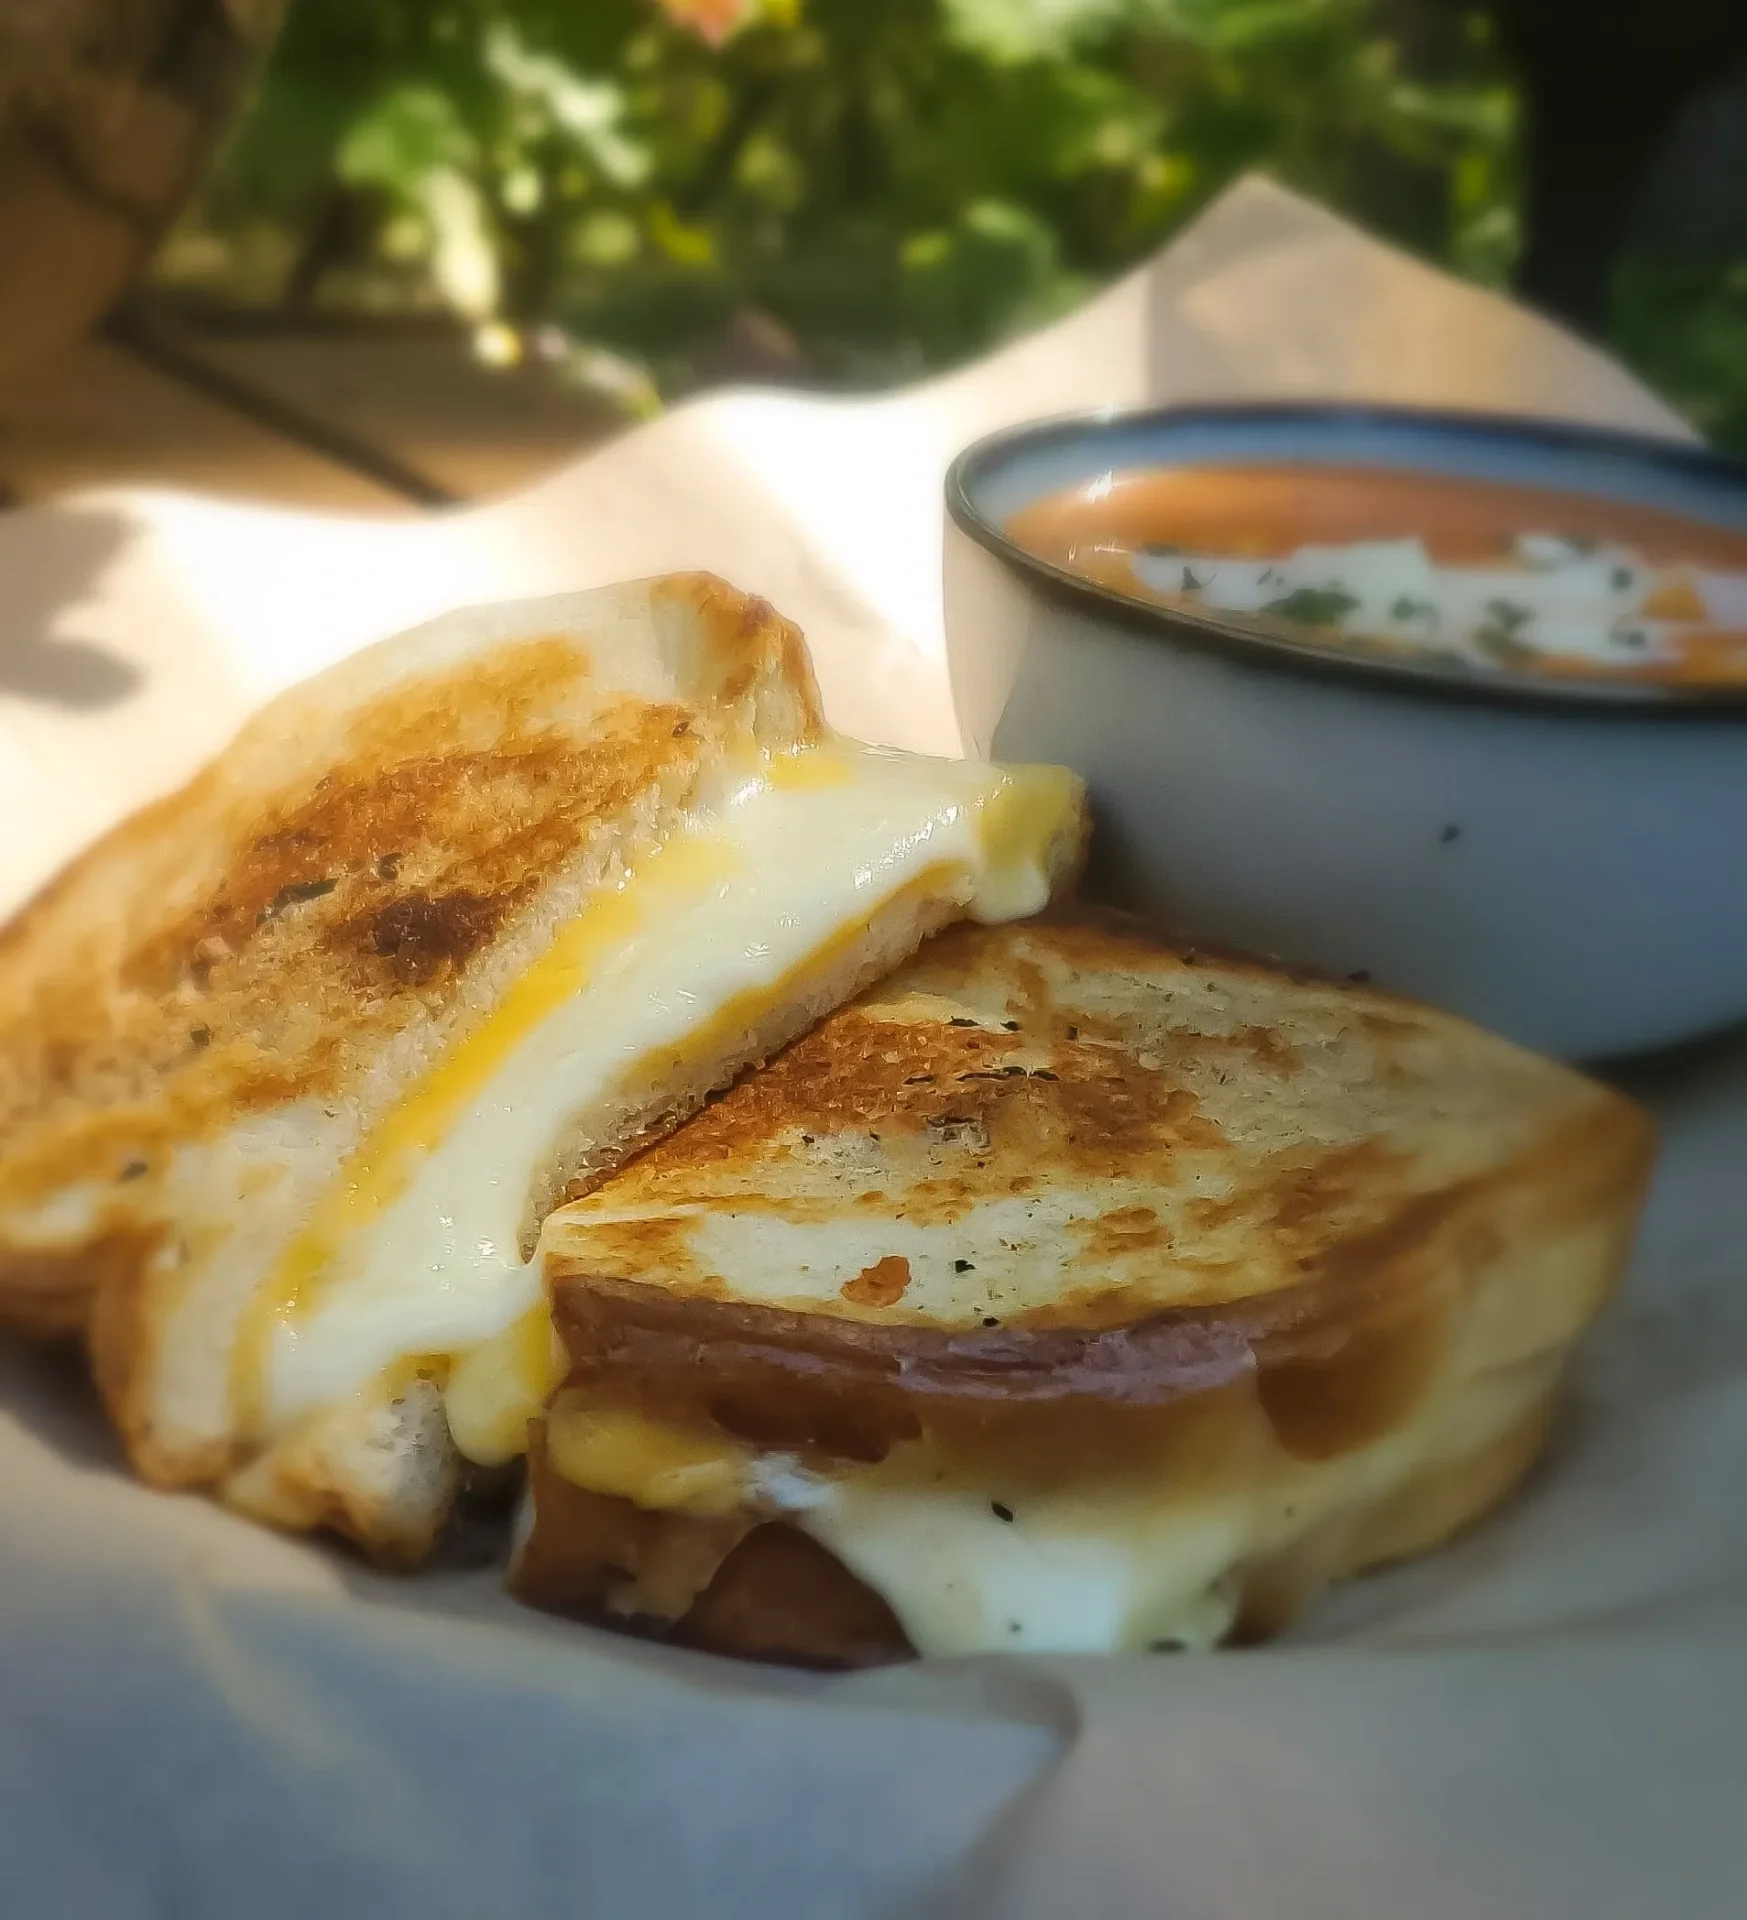 A grilled cheese sandwich and bowl of soup.